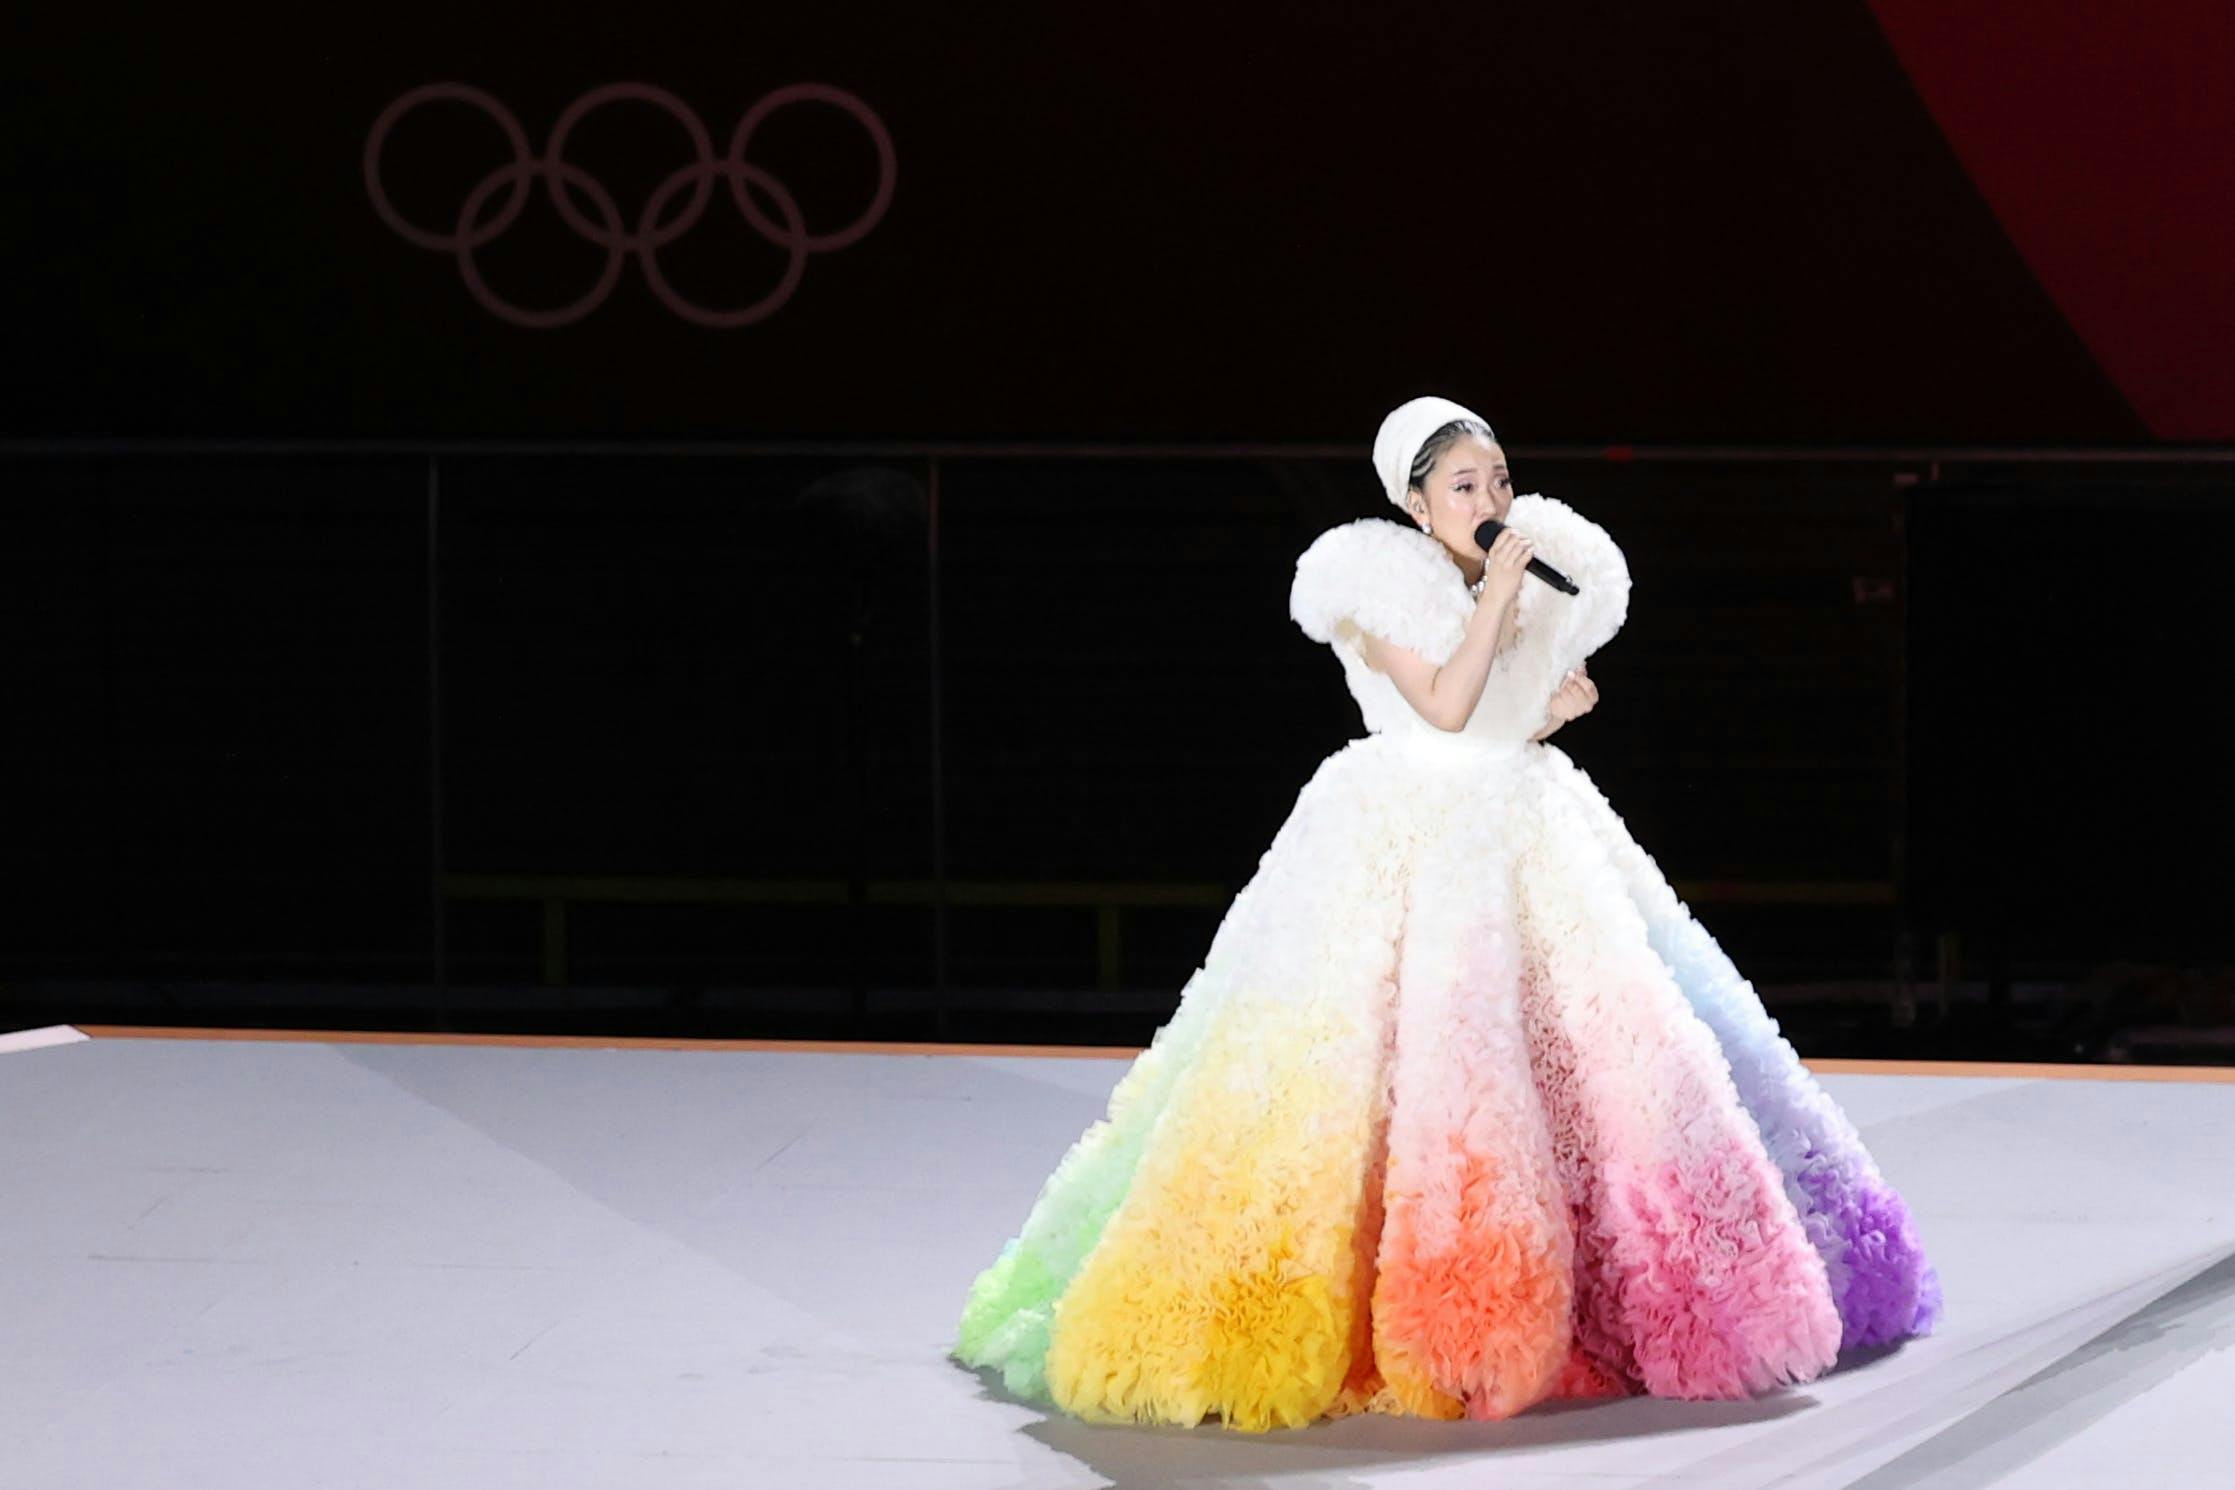 tokyo 2020 summer olympics torch relay olympic games clothing apparel evening dress gown fashion robe female person human